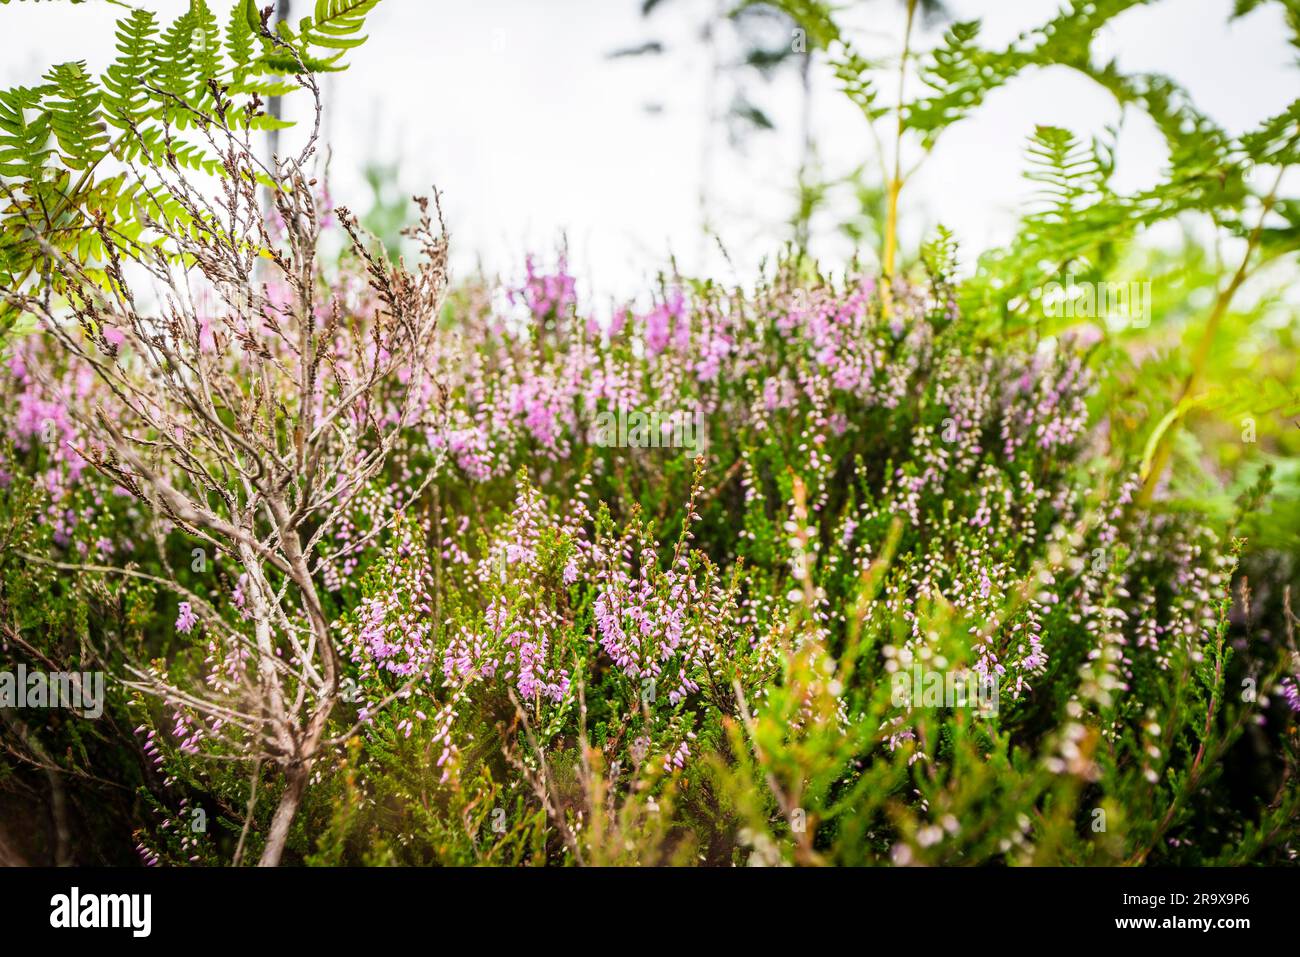 Heather in blooming violet colors on a field in the summer Stock Photo